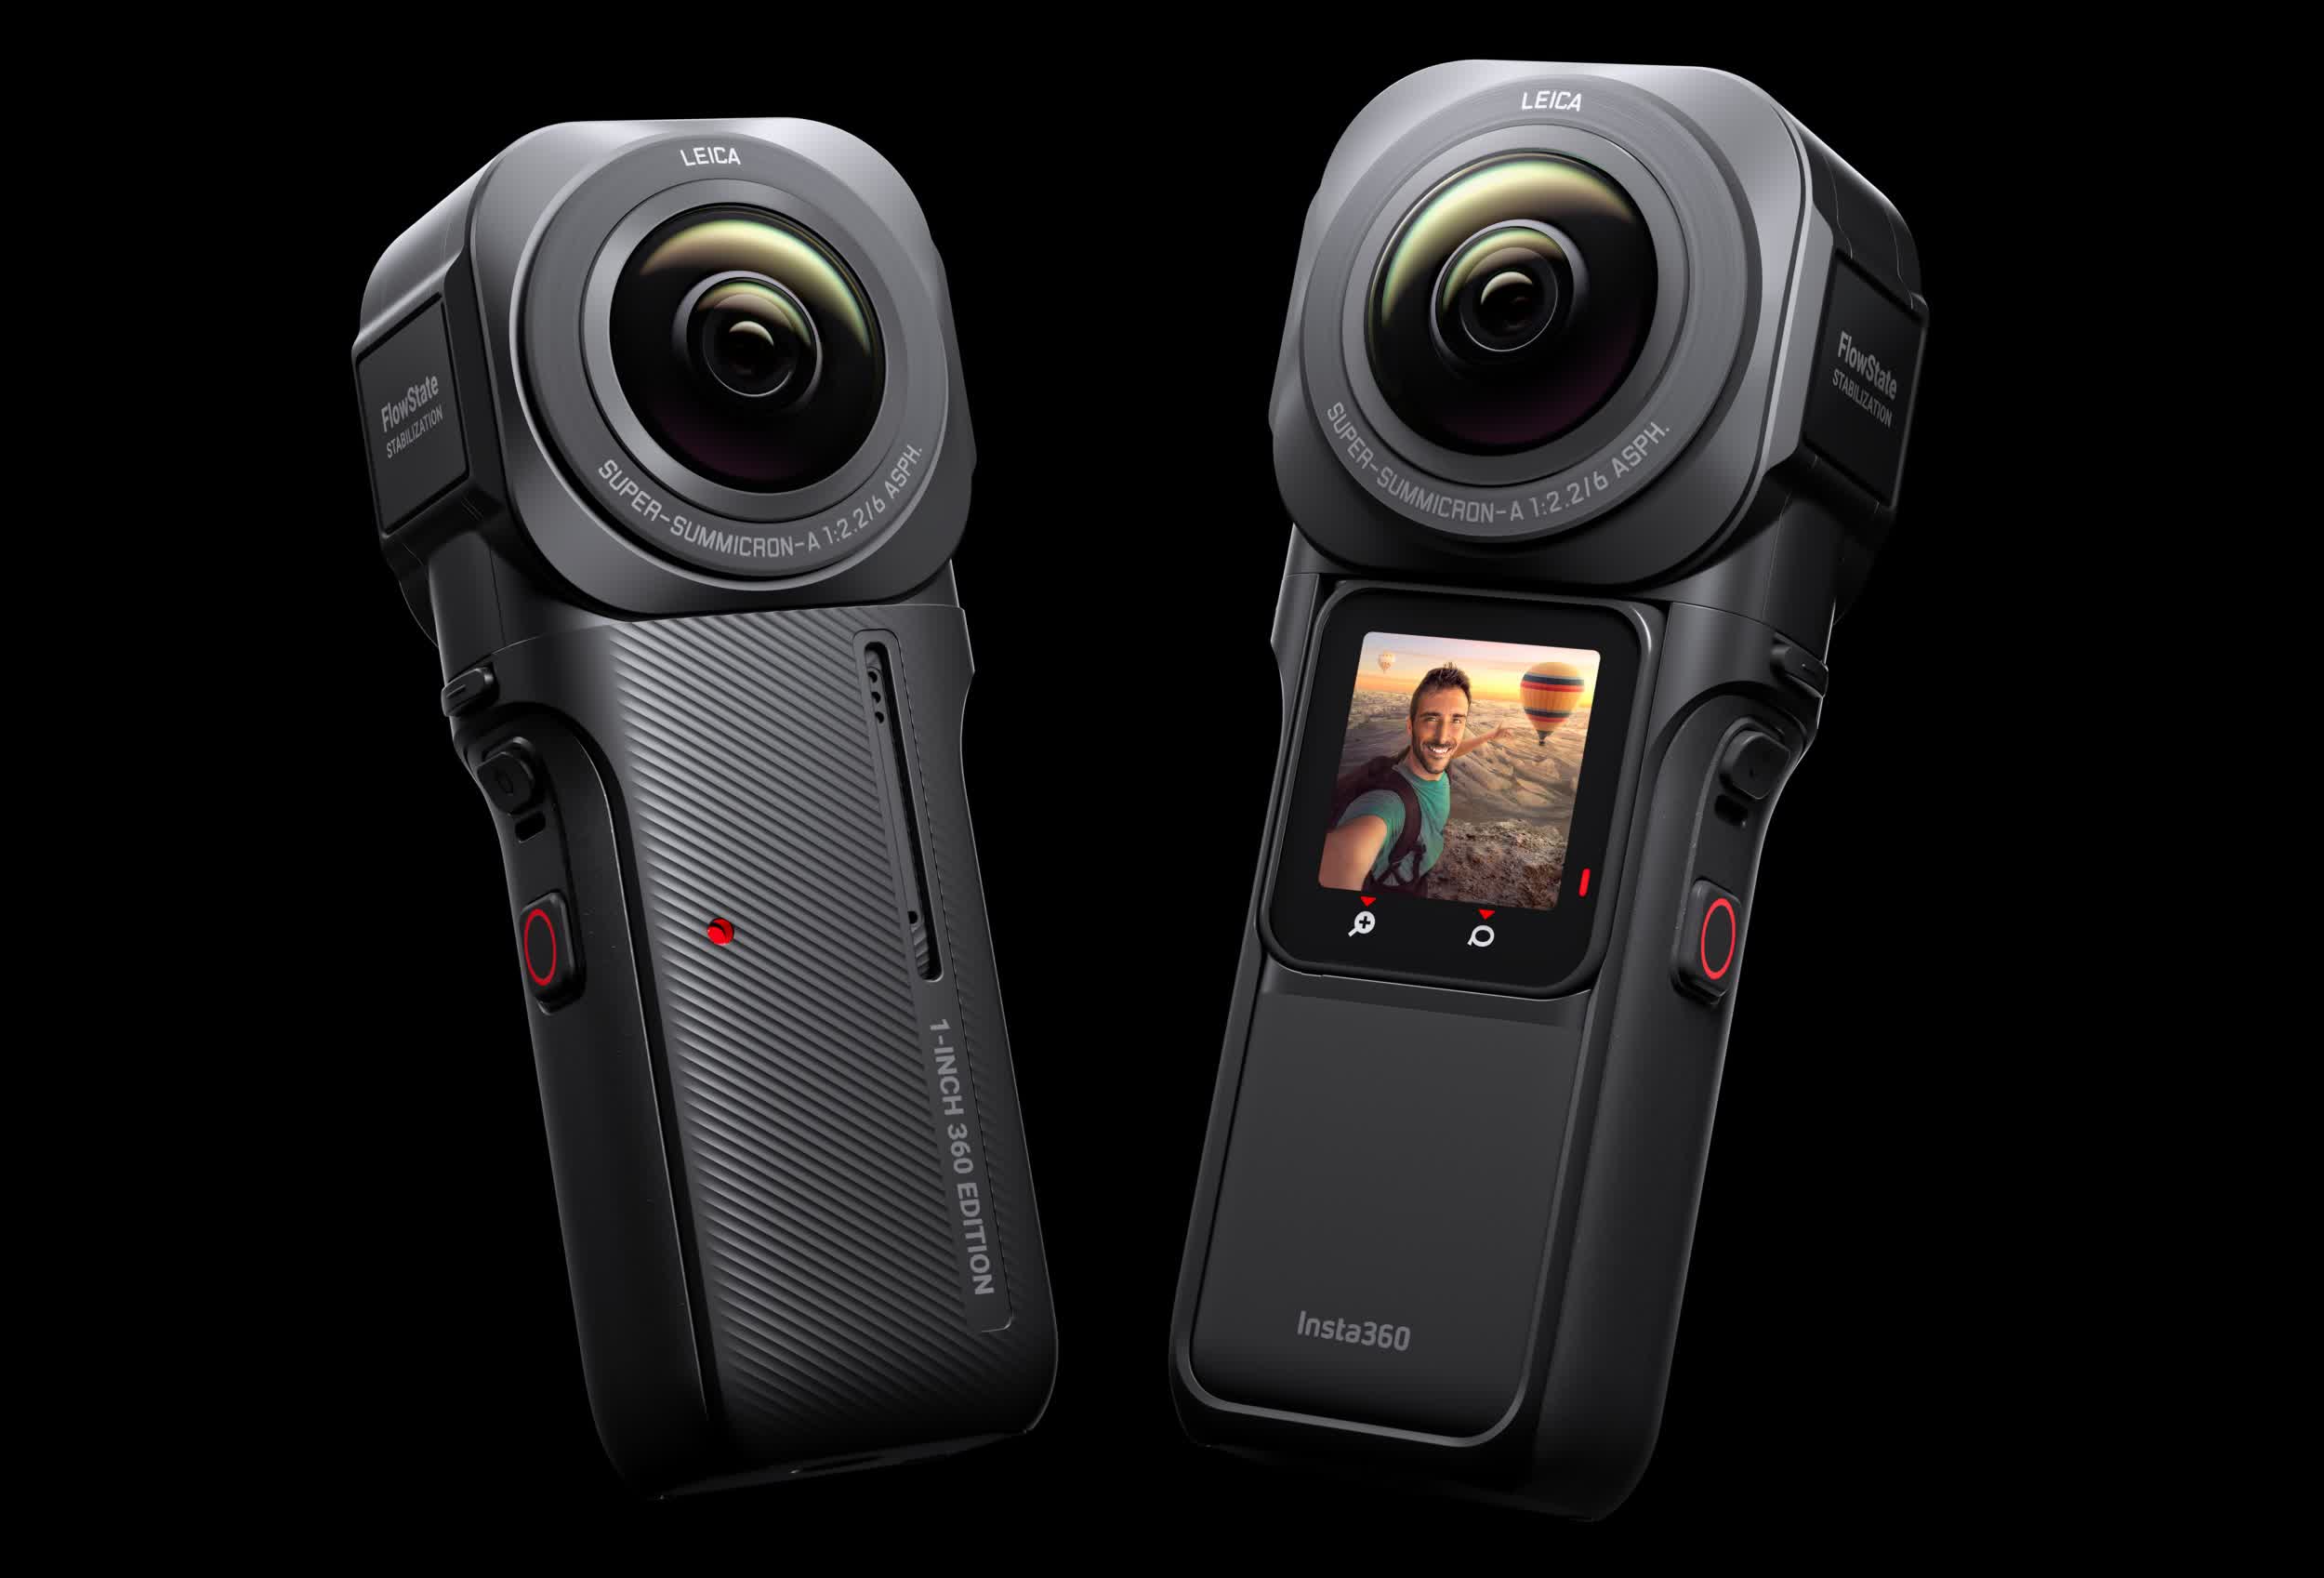 Insta360 partners with Leica on new 360-degree camera